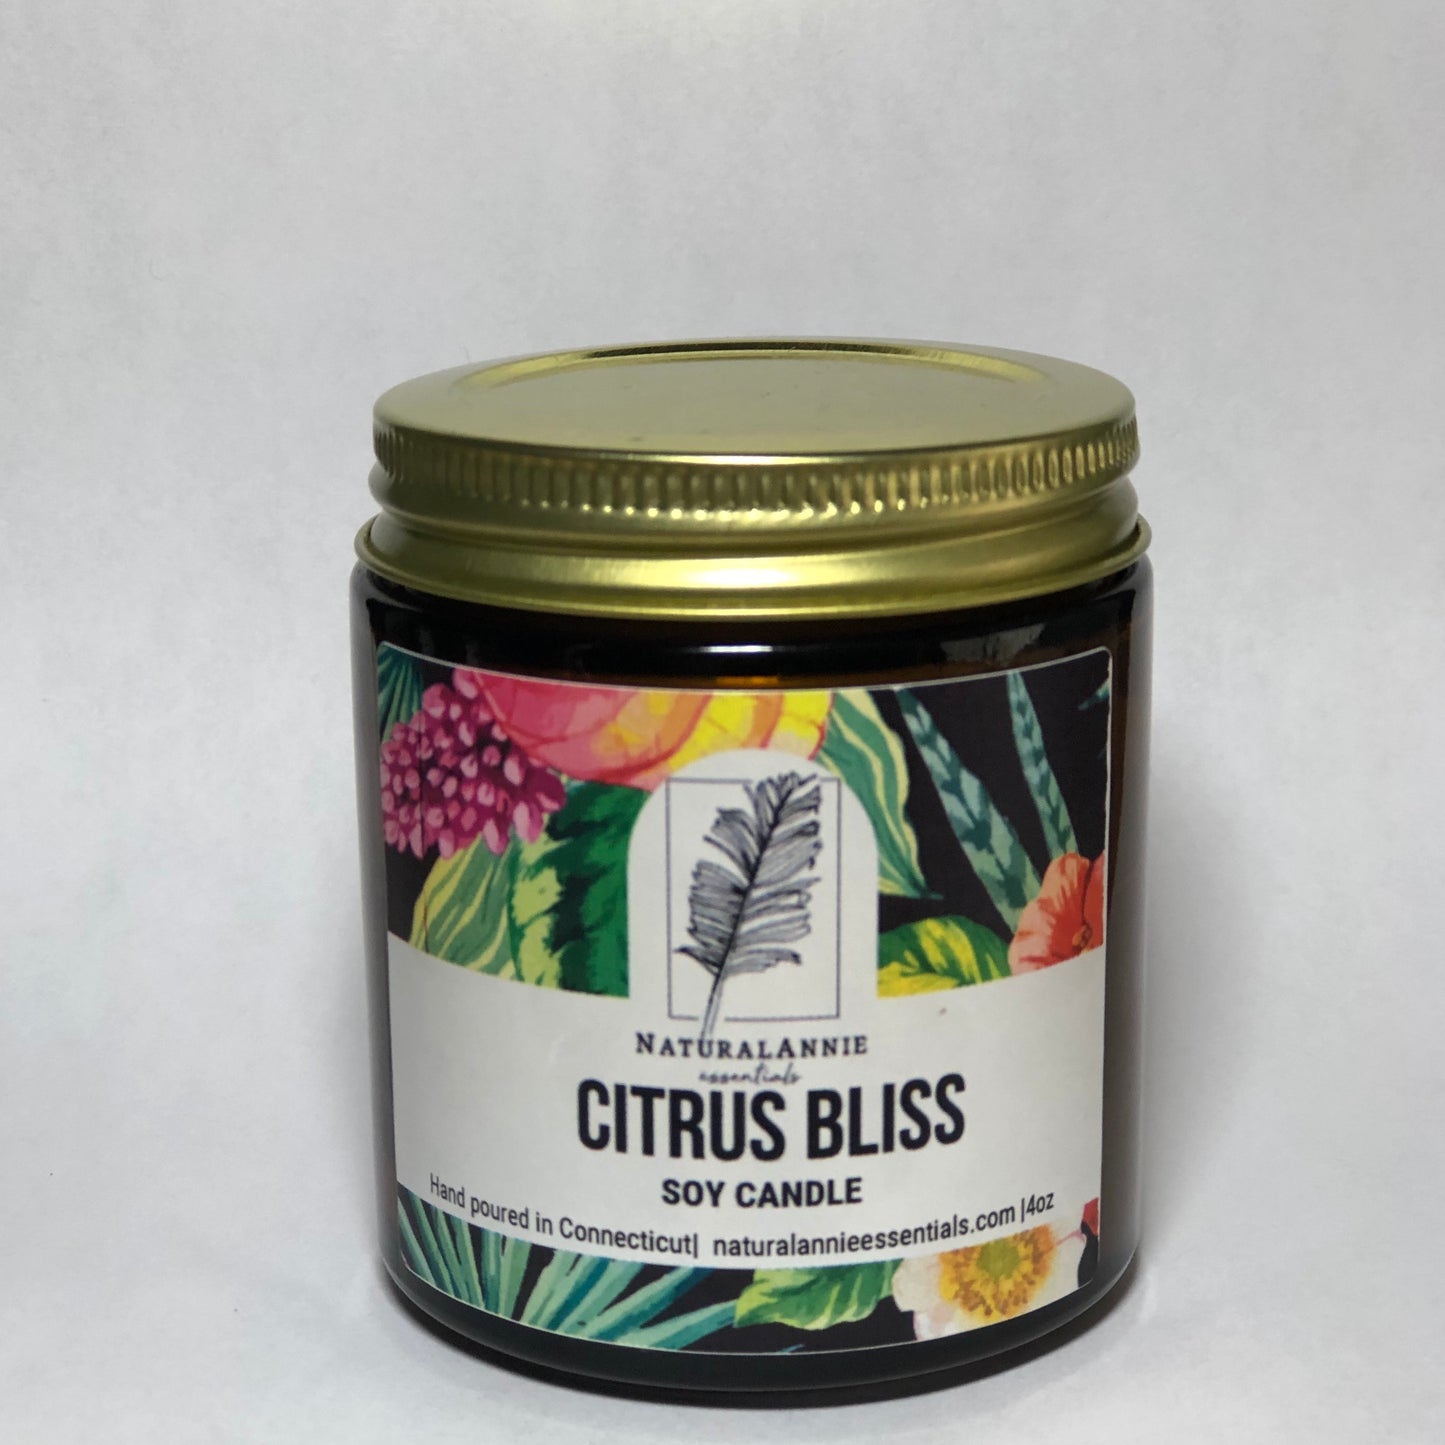 Citrus Bliss Soy Candle